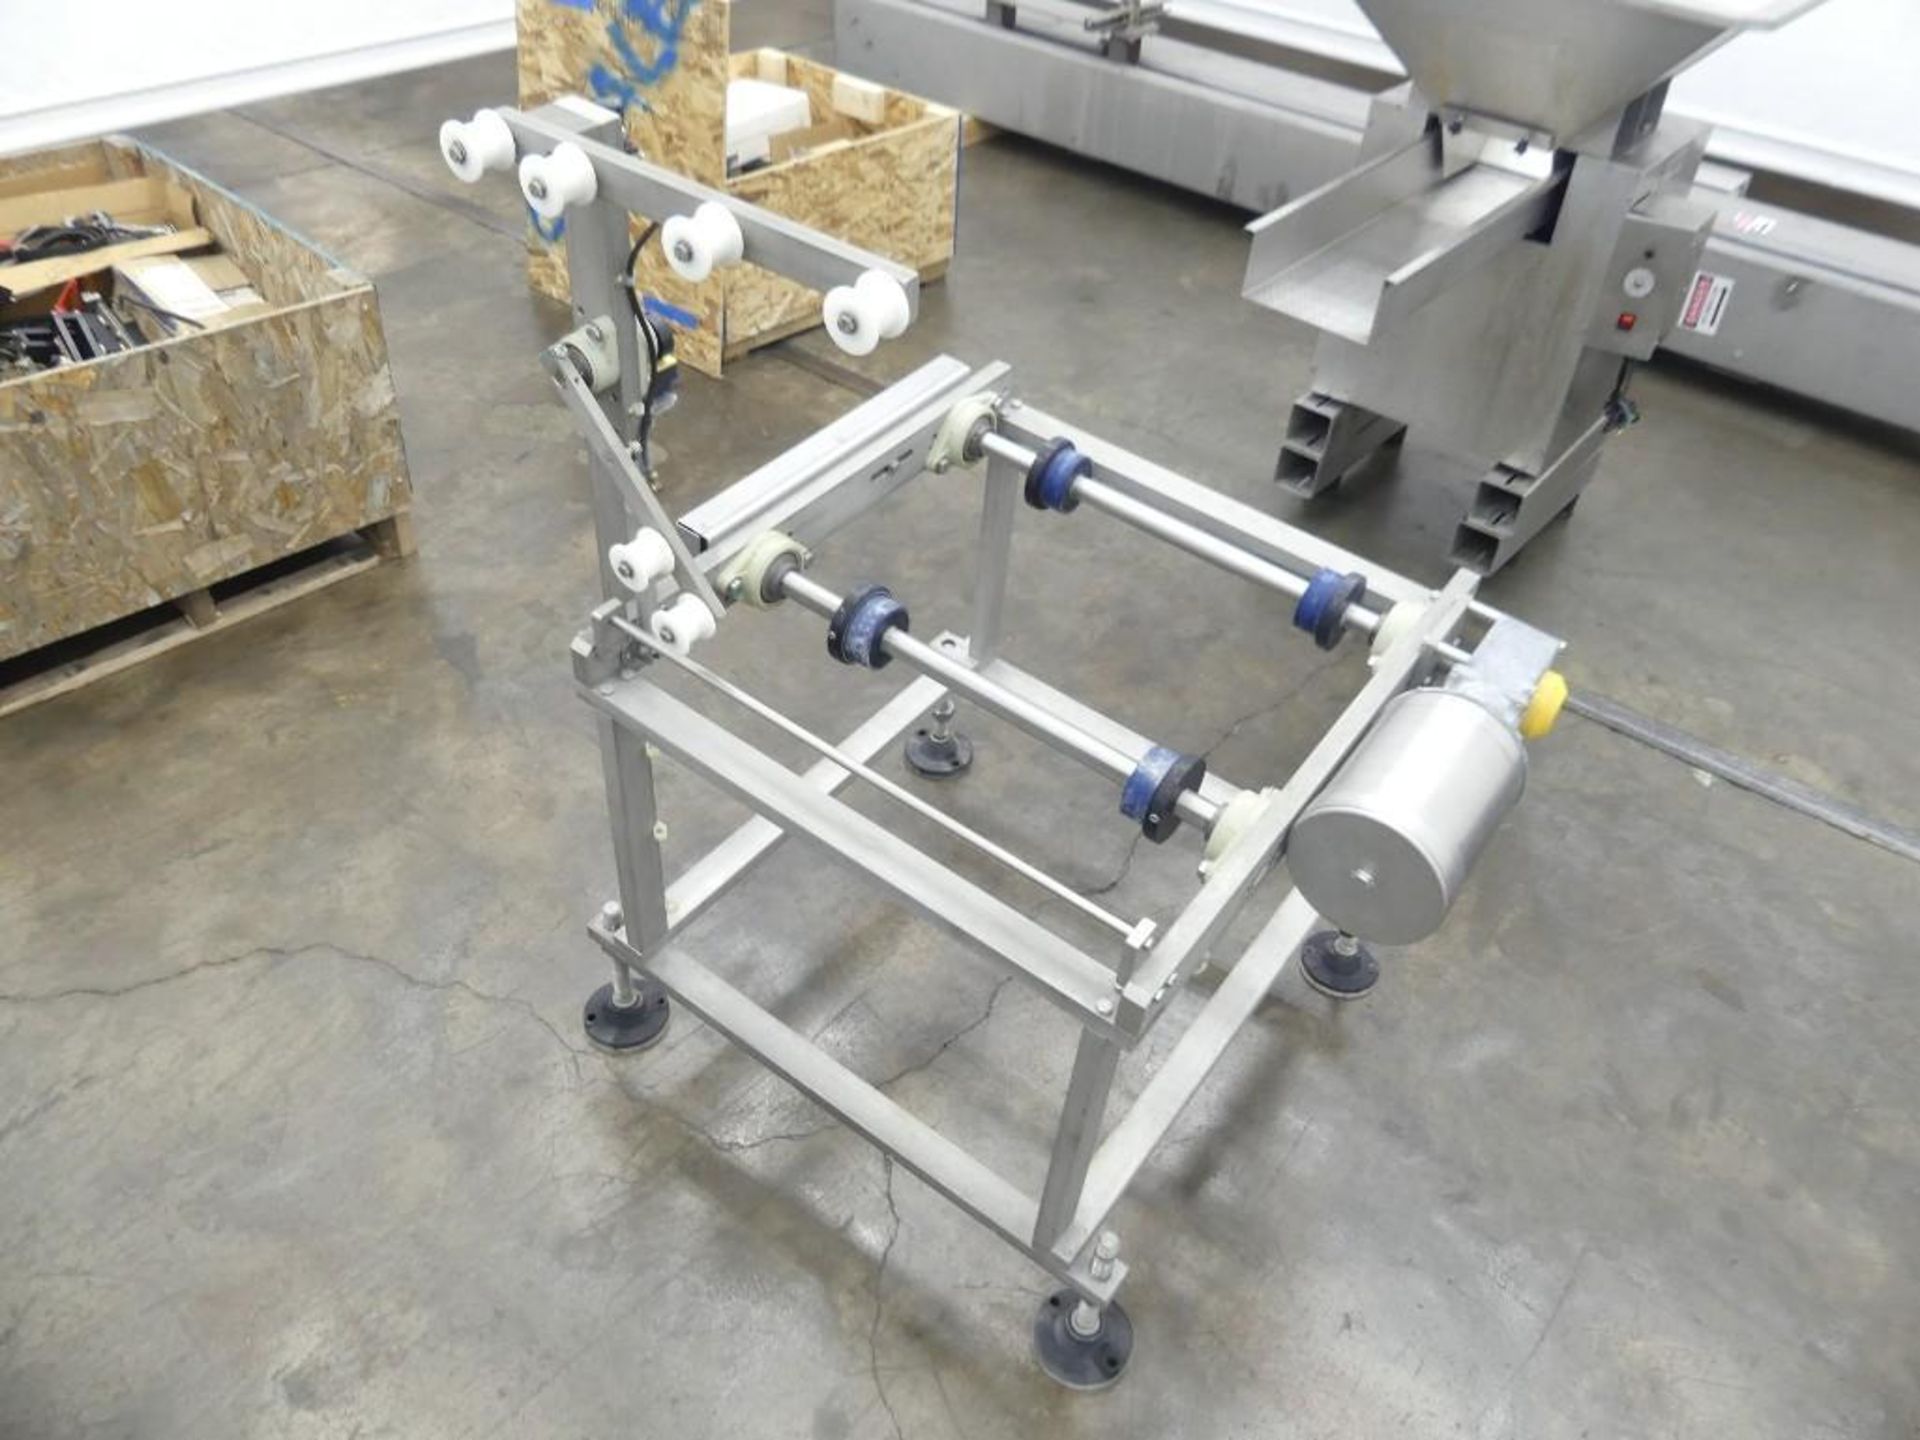 Massman HFFS-IM1000 Flexible Pouch Packaging System - Image 69 of 127